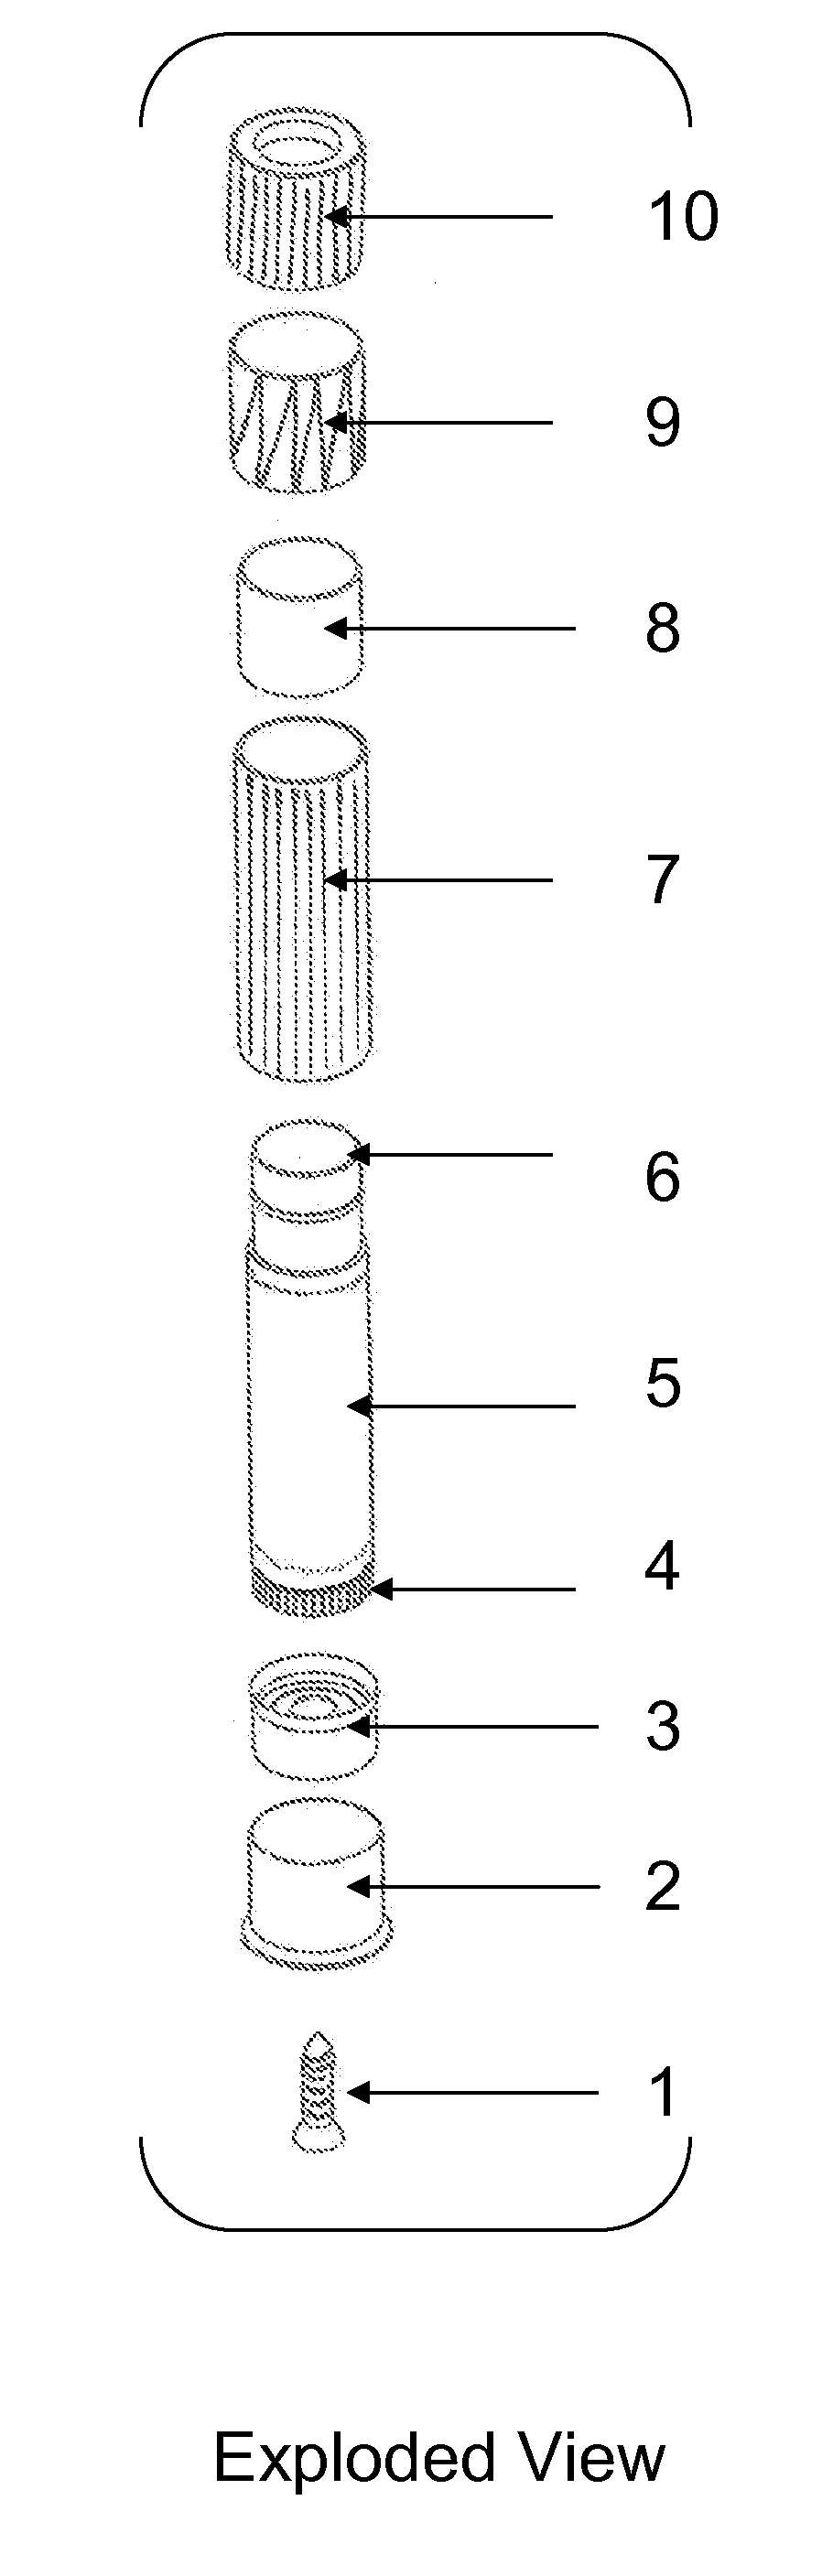 Lip balm, cosmetic or personal care product dispenser utilizing a non-lethal shotgun shell hull and modified primer